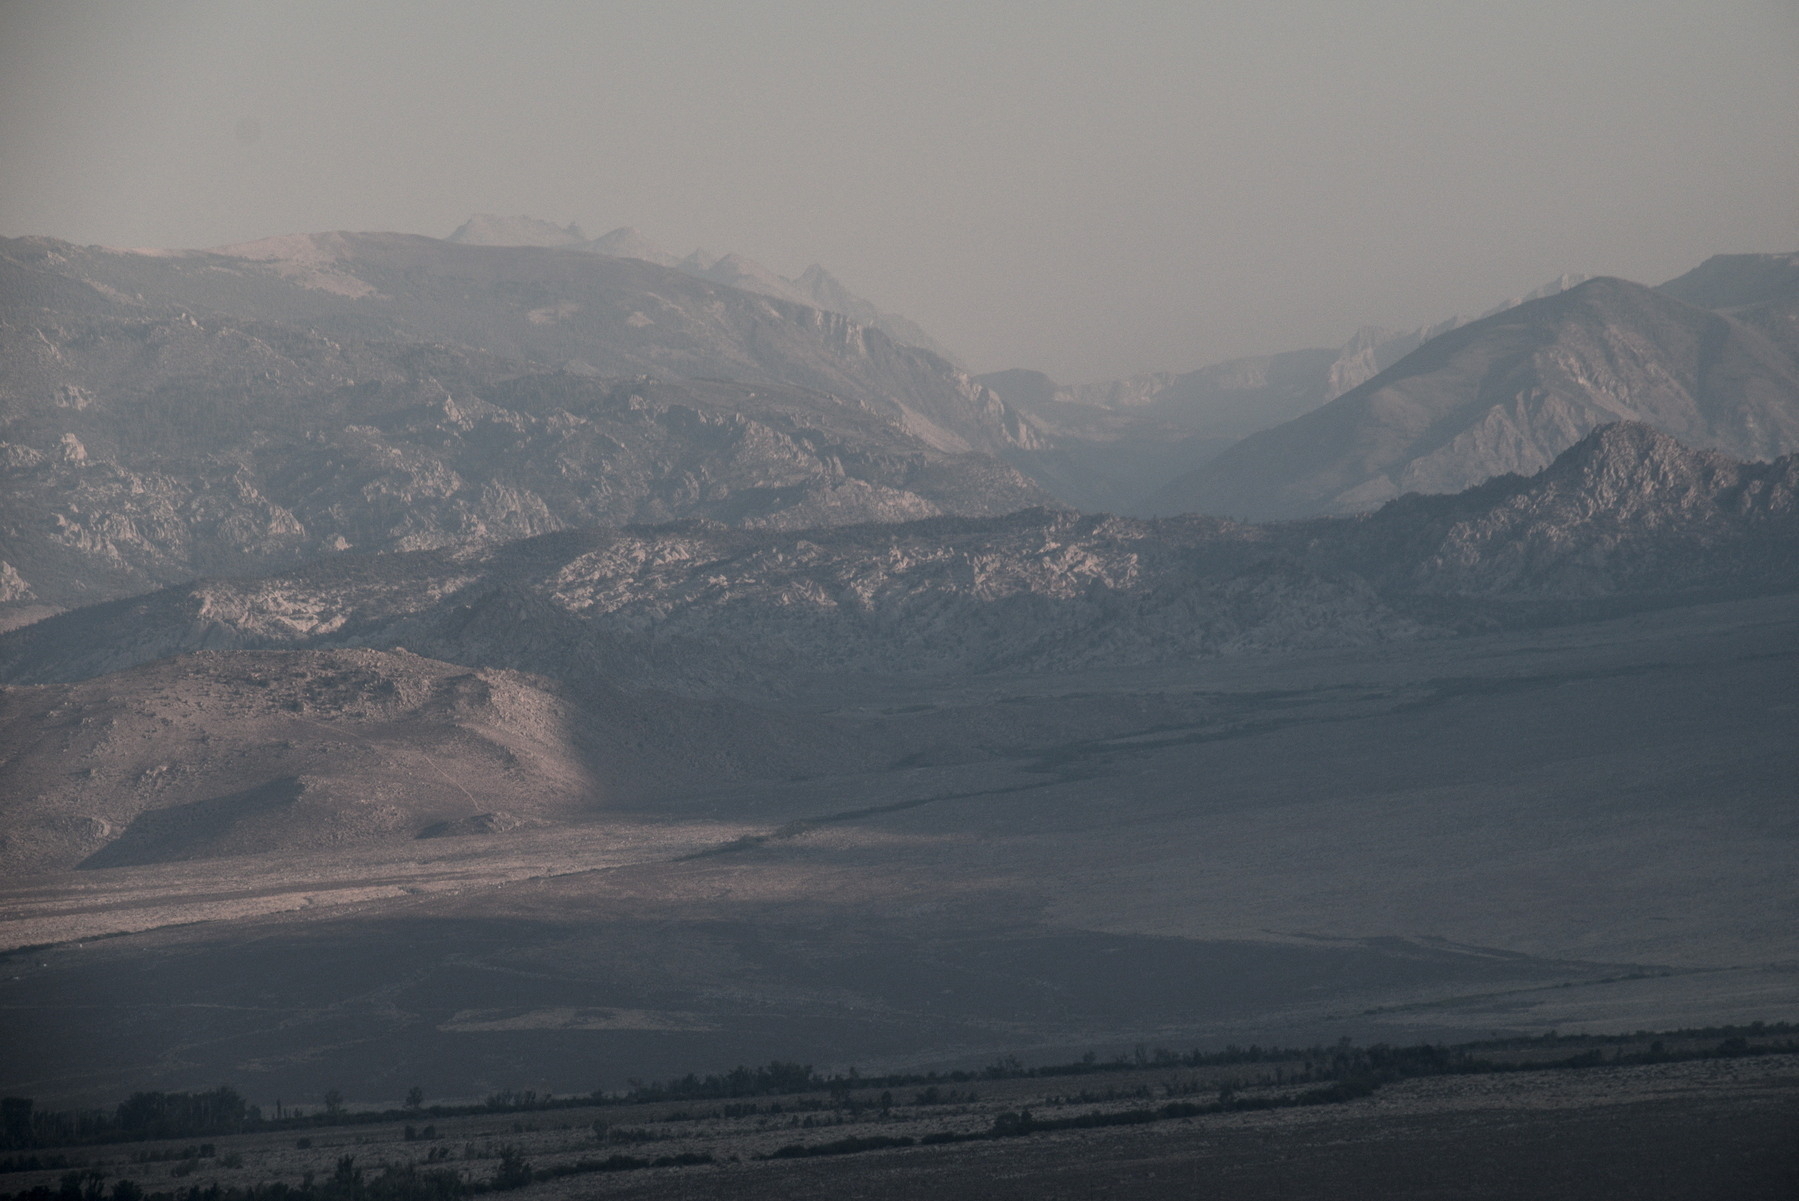 The Buttermilk Hills and eastern Sierra Nevada, obscured by smoke.